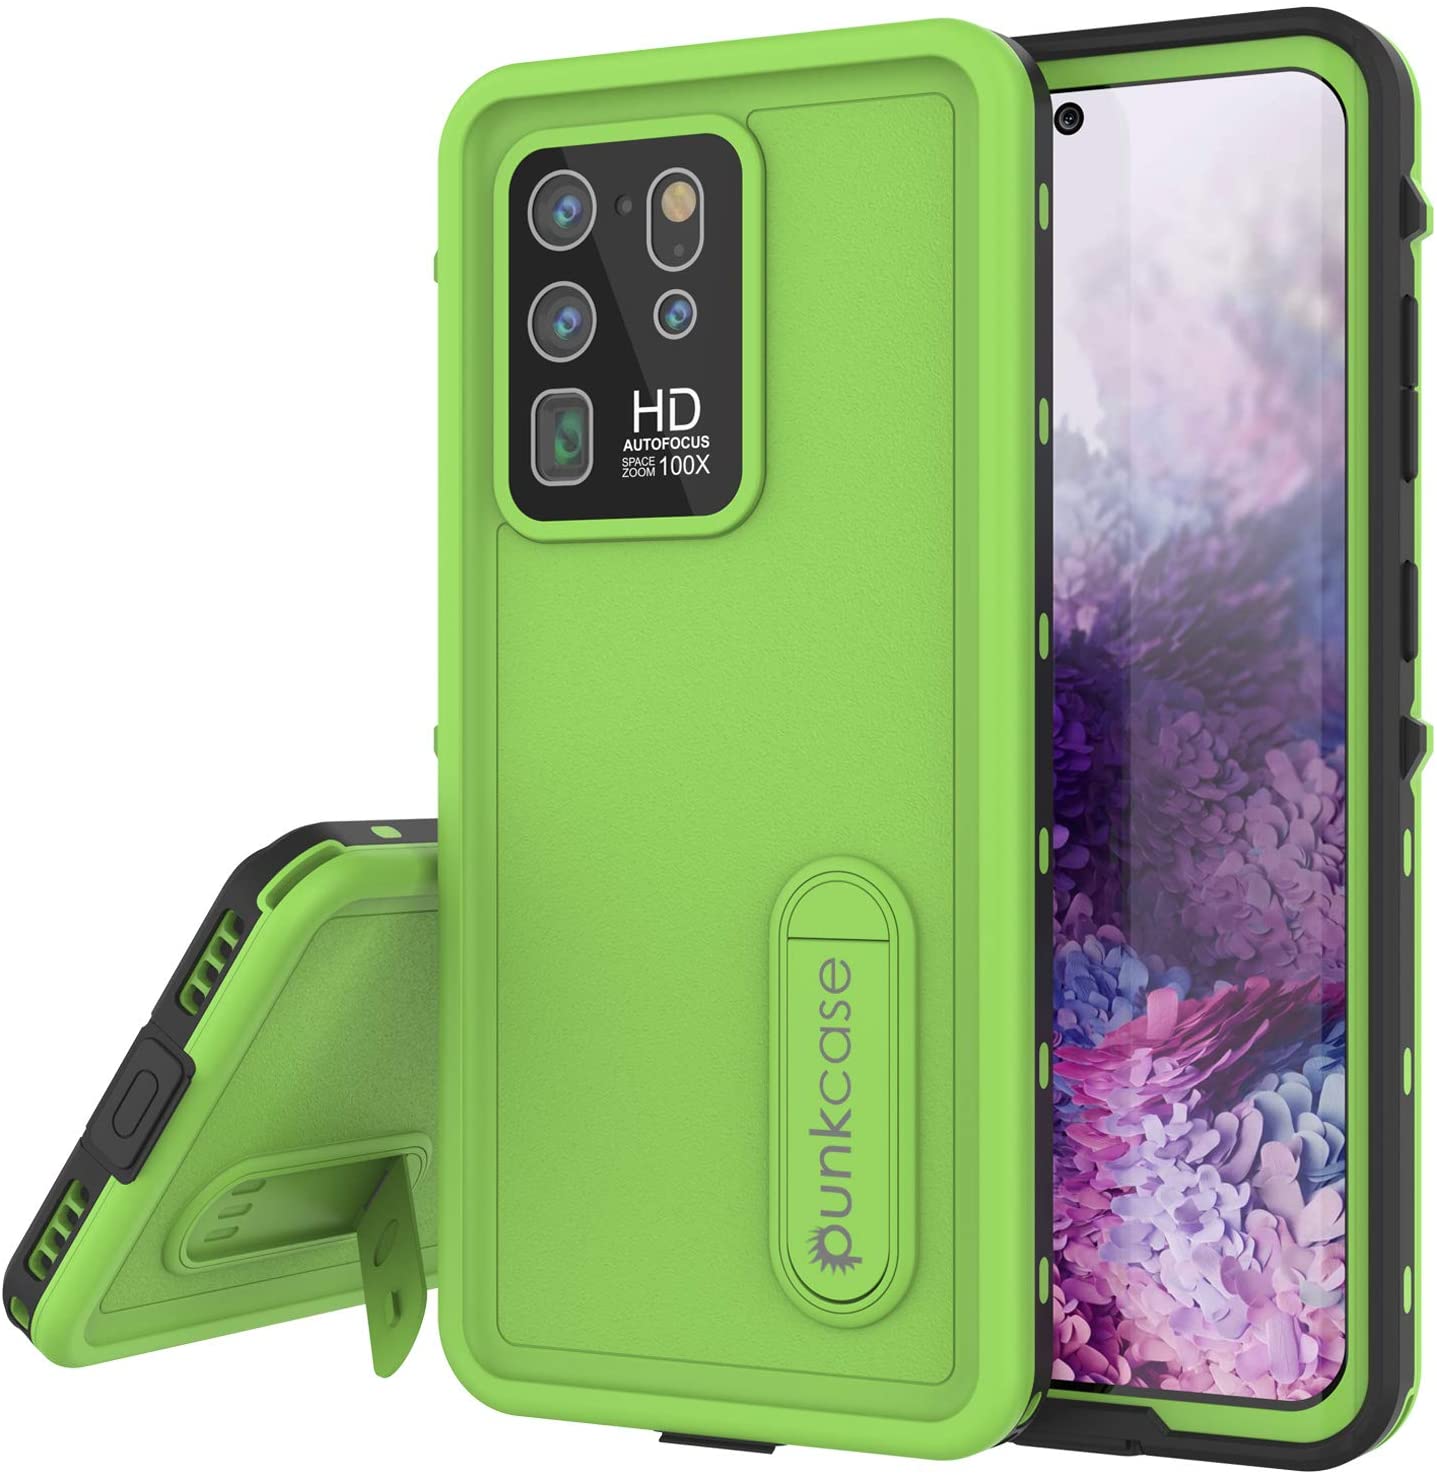 Galaxy S20 Ultra Waterproof Case, Punkcase [KickStud Series] Armor Cover [Light Green] (Color in image: Light Green)